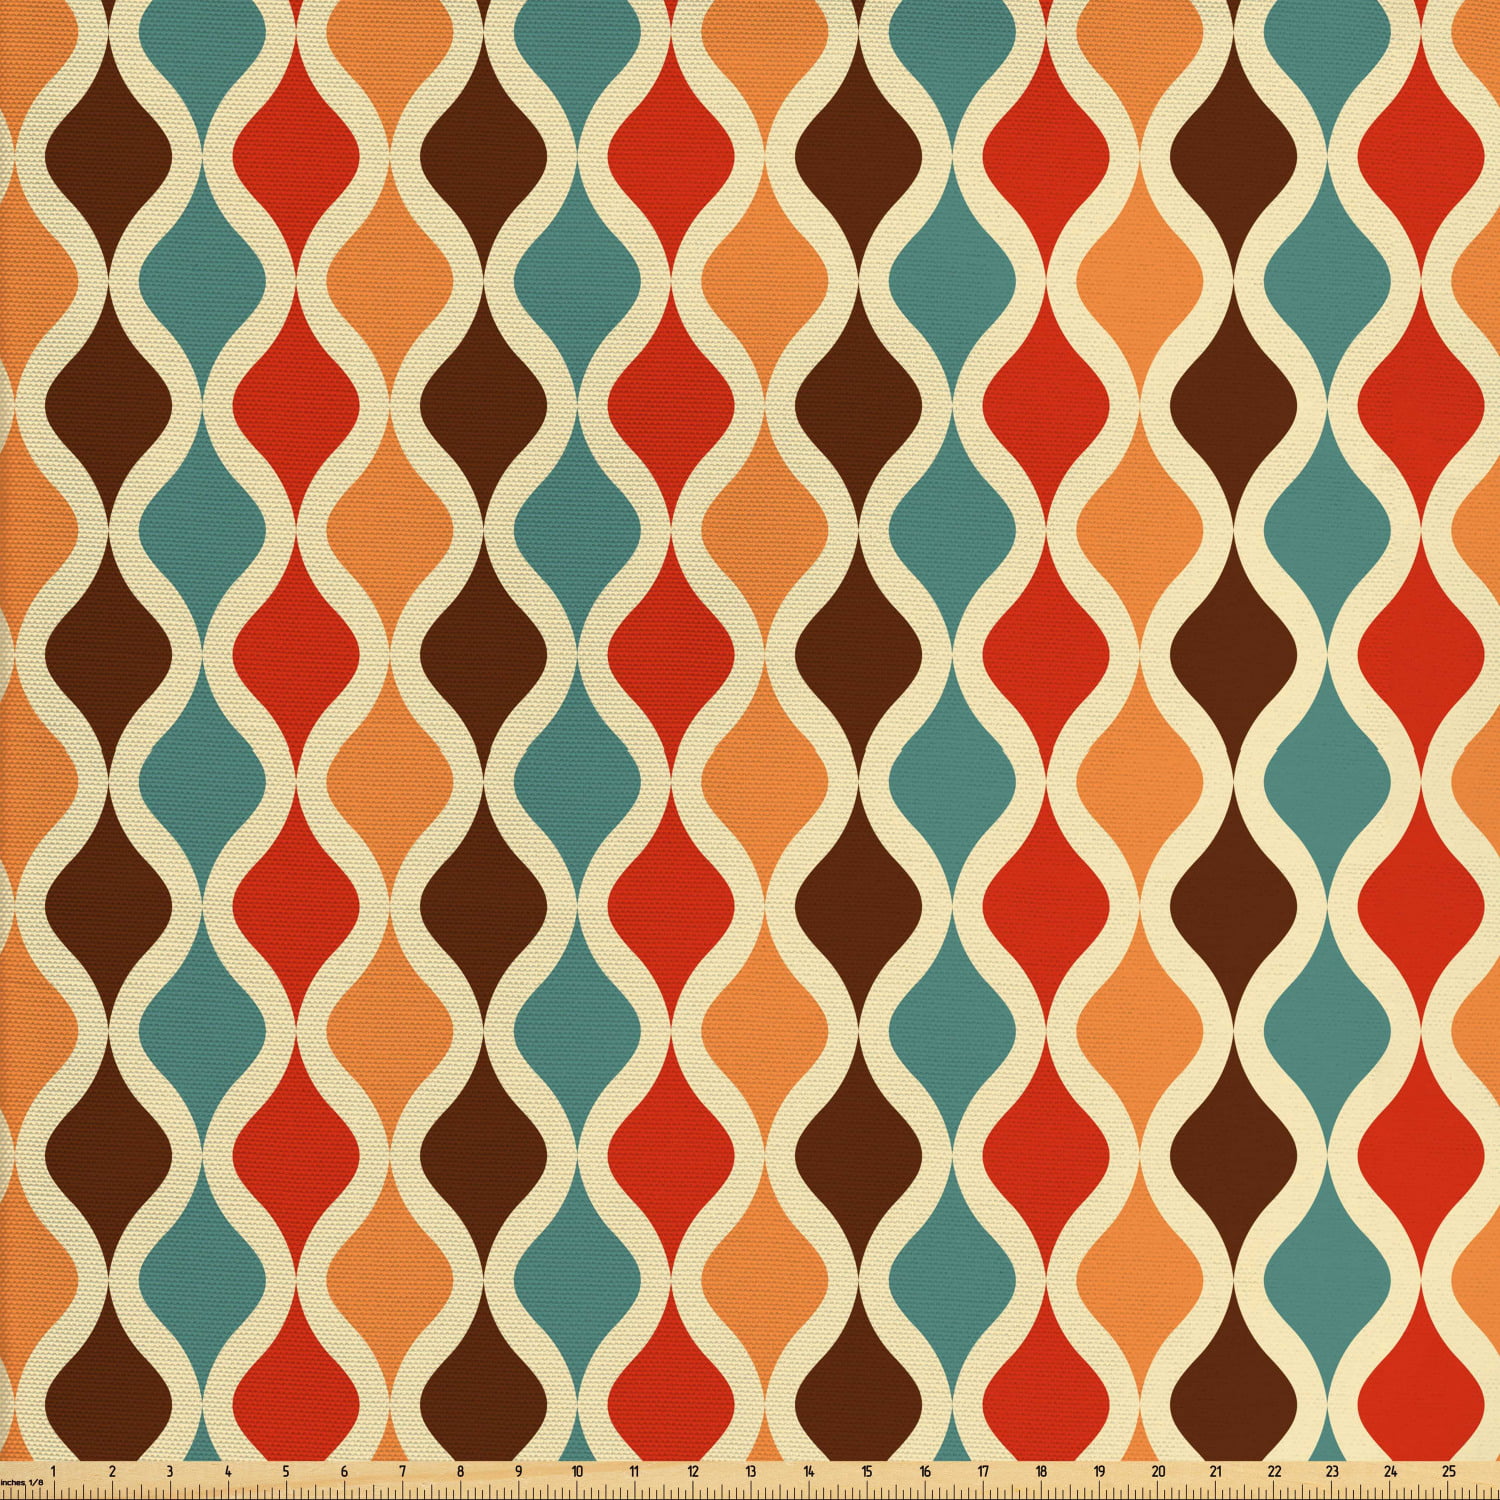 Retro Fabric by the Yard, Funk Different Vintage Pattern Composition